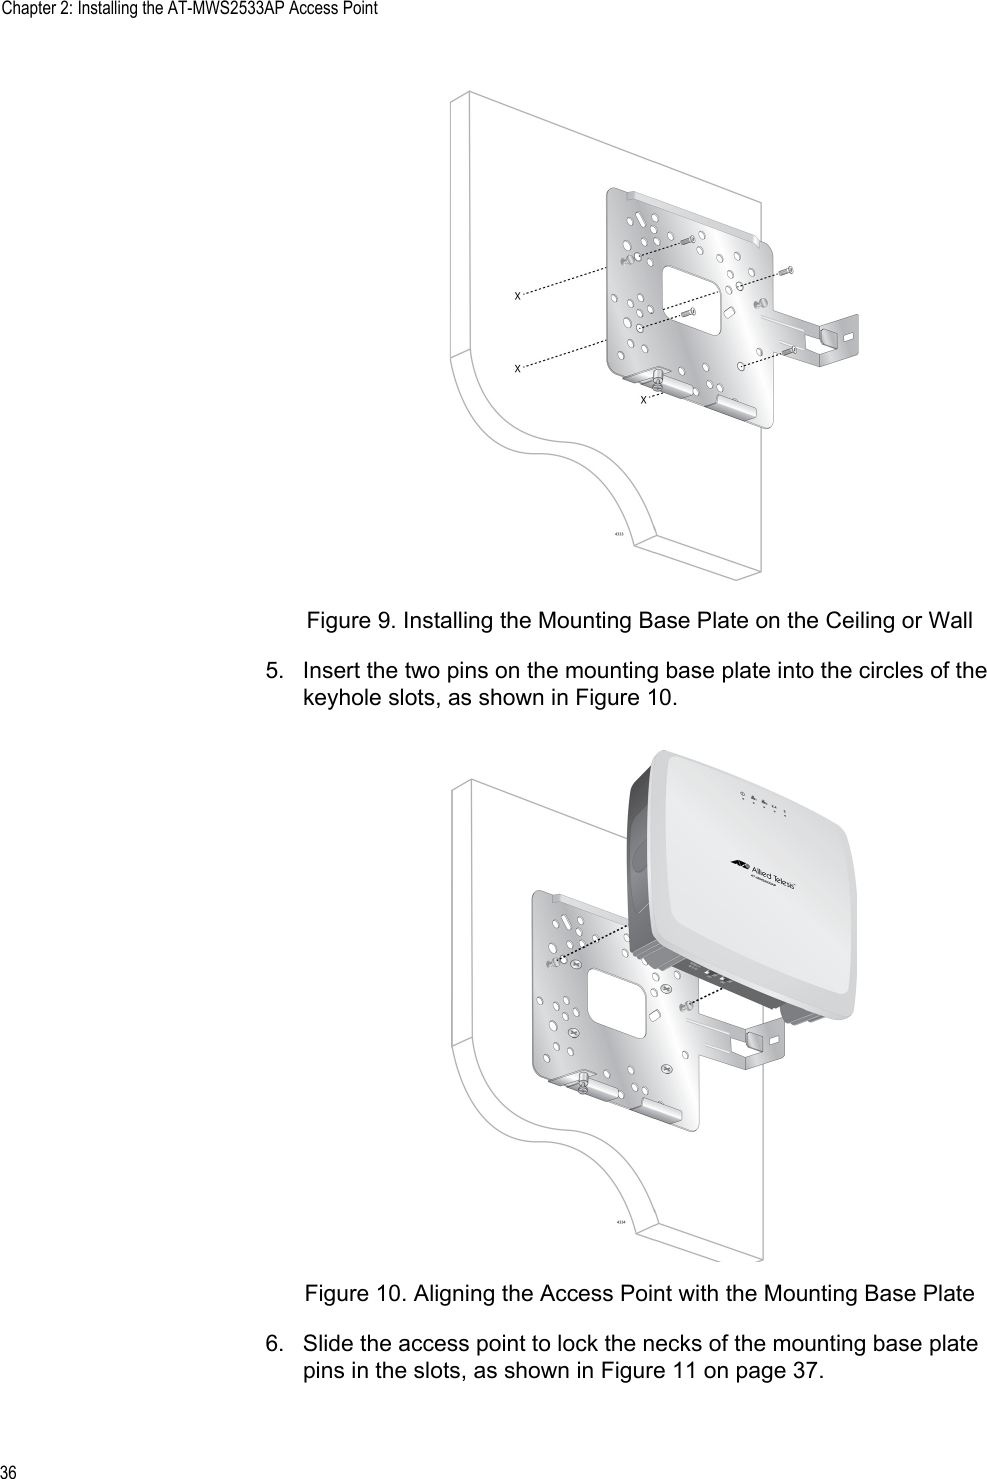 Chapter 2: Installing the AT-MWS2533AP Access Point36Figure 9. Installing the Mounting Base Plate on the Ceiling or Wall5. Insert the two pins on the mounting base plate into the circles of the keyhole slots, as shown in Figure 10.Figure 10. Aligning the Access Point with the Mounting Base Plate6. Slide the access point to lock the necks of the mounting base plate pins in the slots, as shown in Figure 11 on page 37.